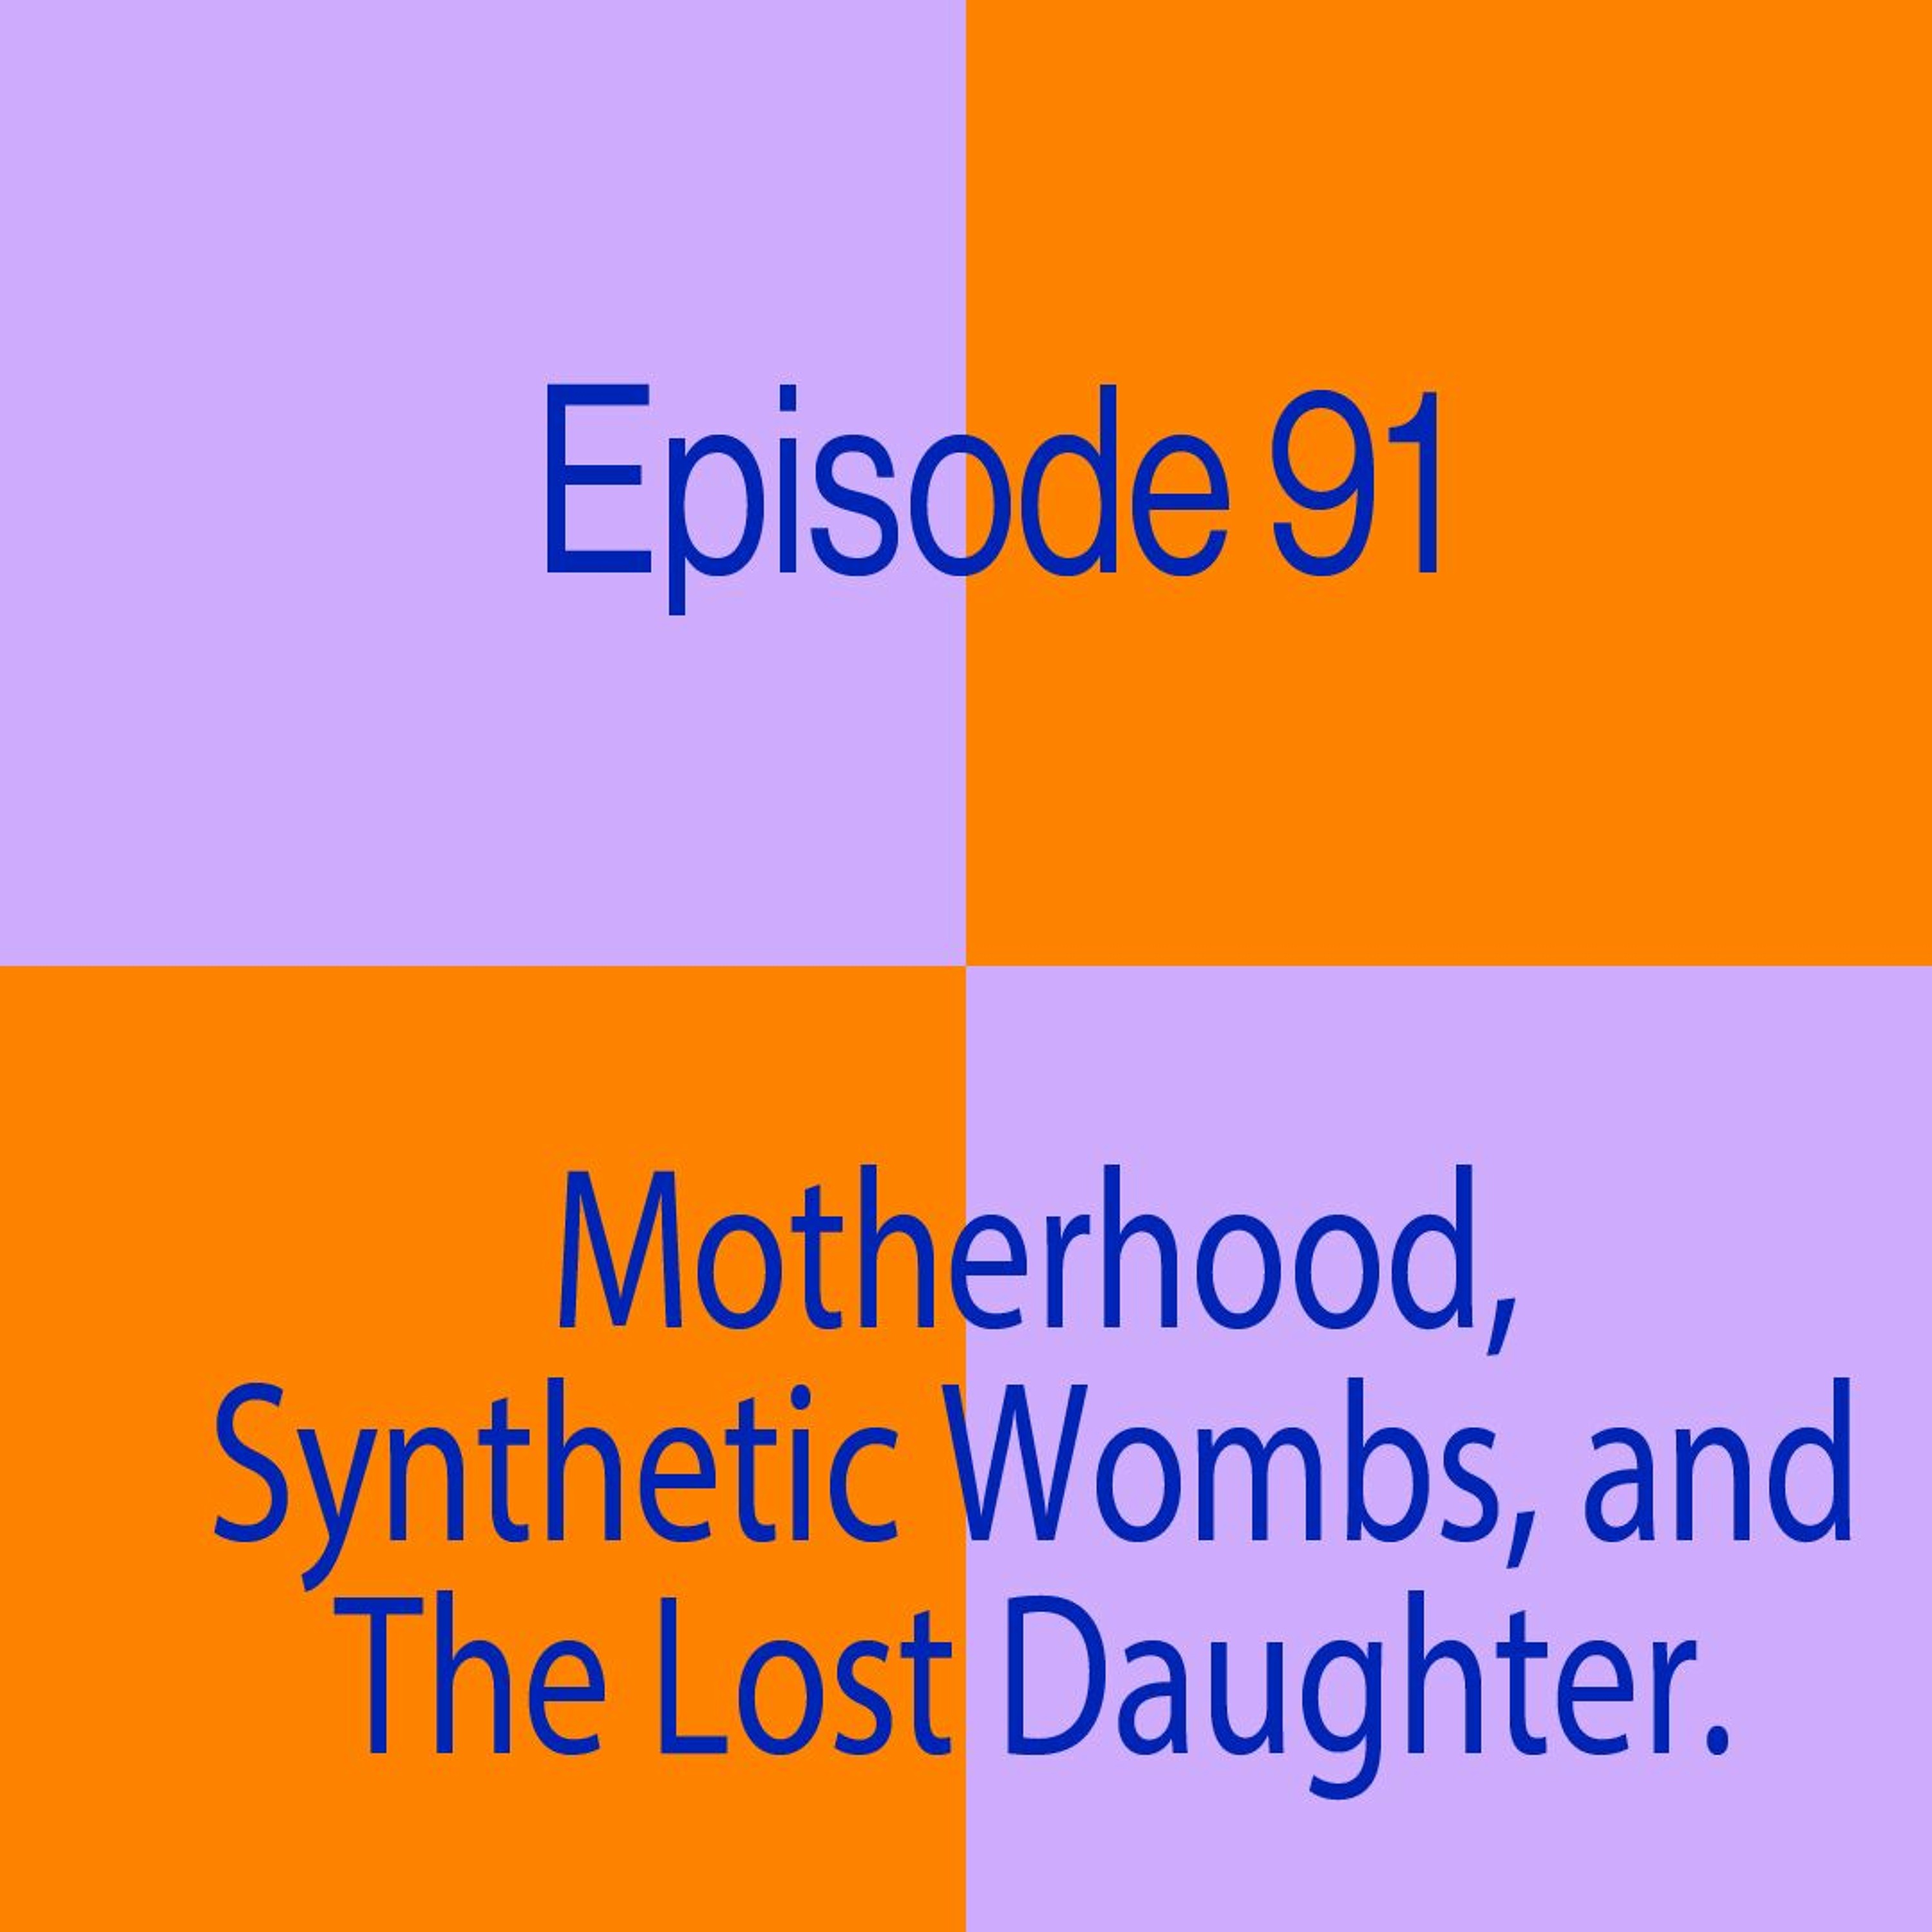 Episode 91: Motherhood, Synthetic Wombs, and the Lost Daughter